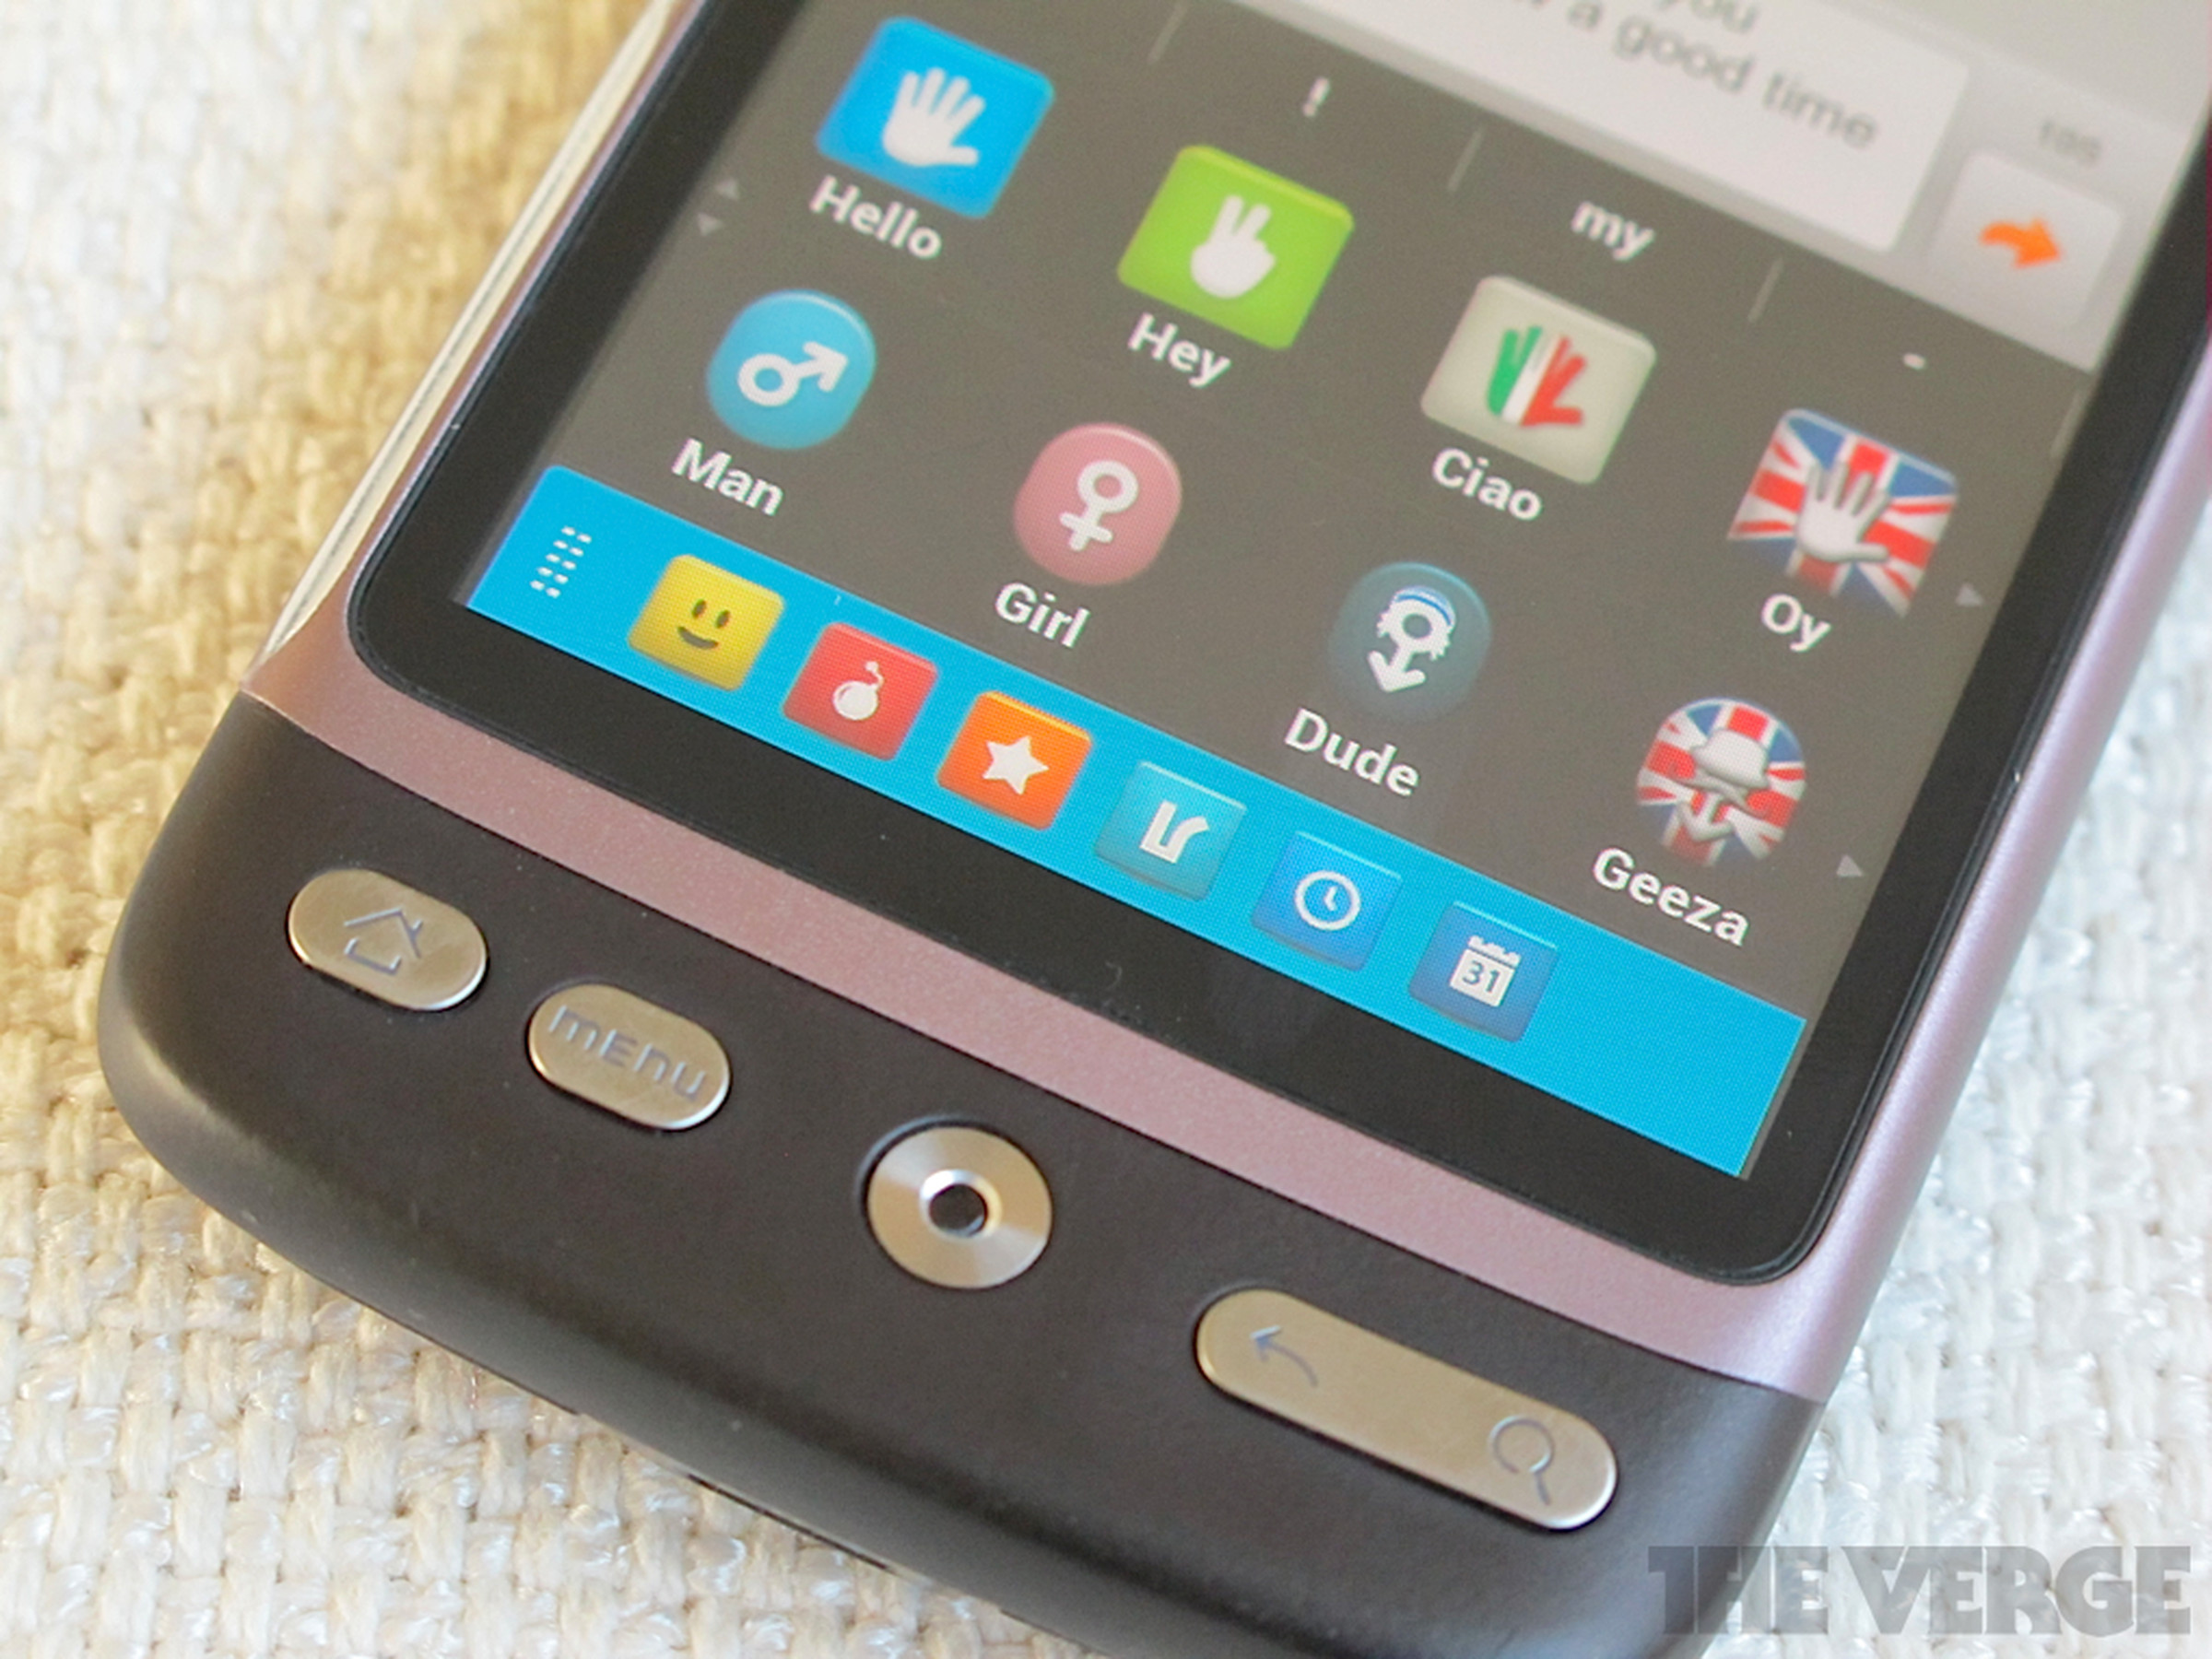 Siine Android Keyboard: hands-on images